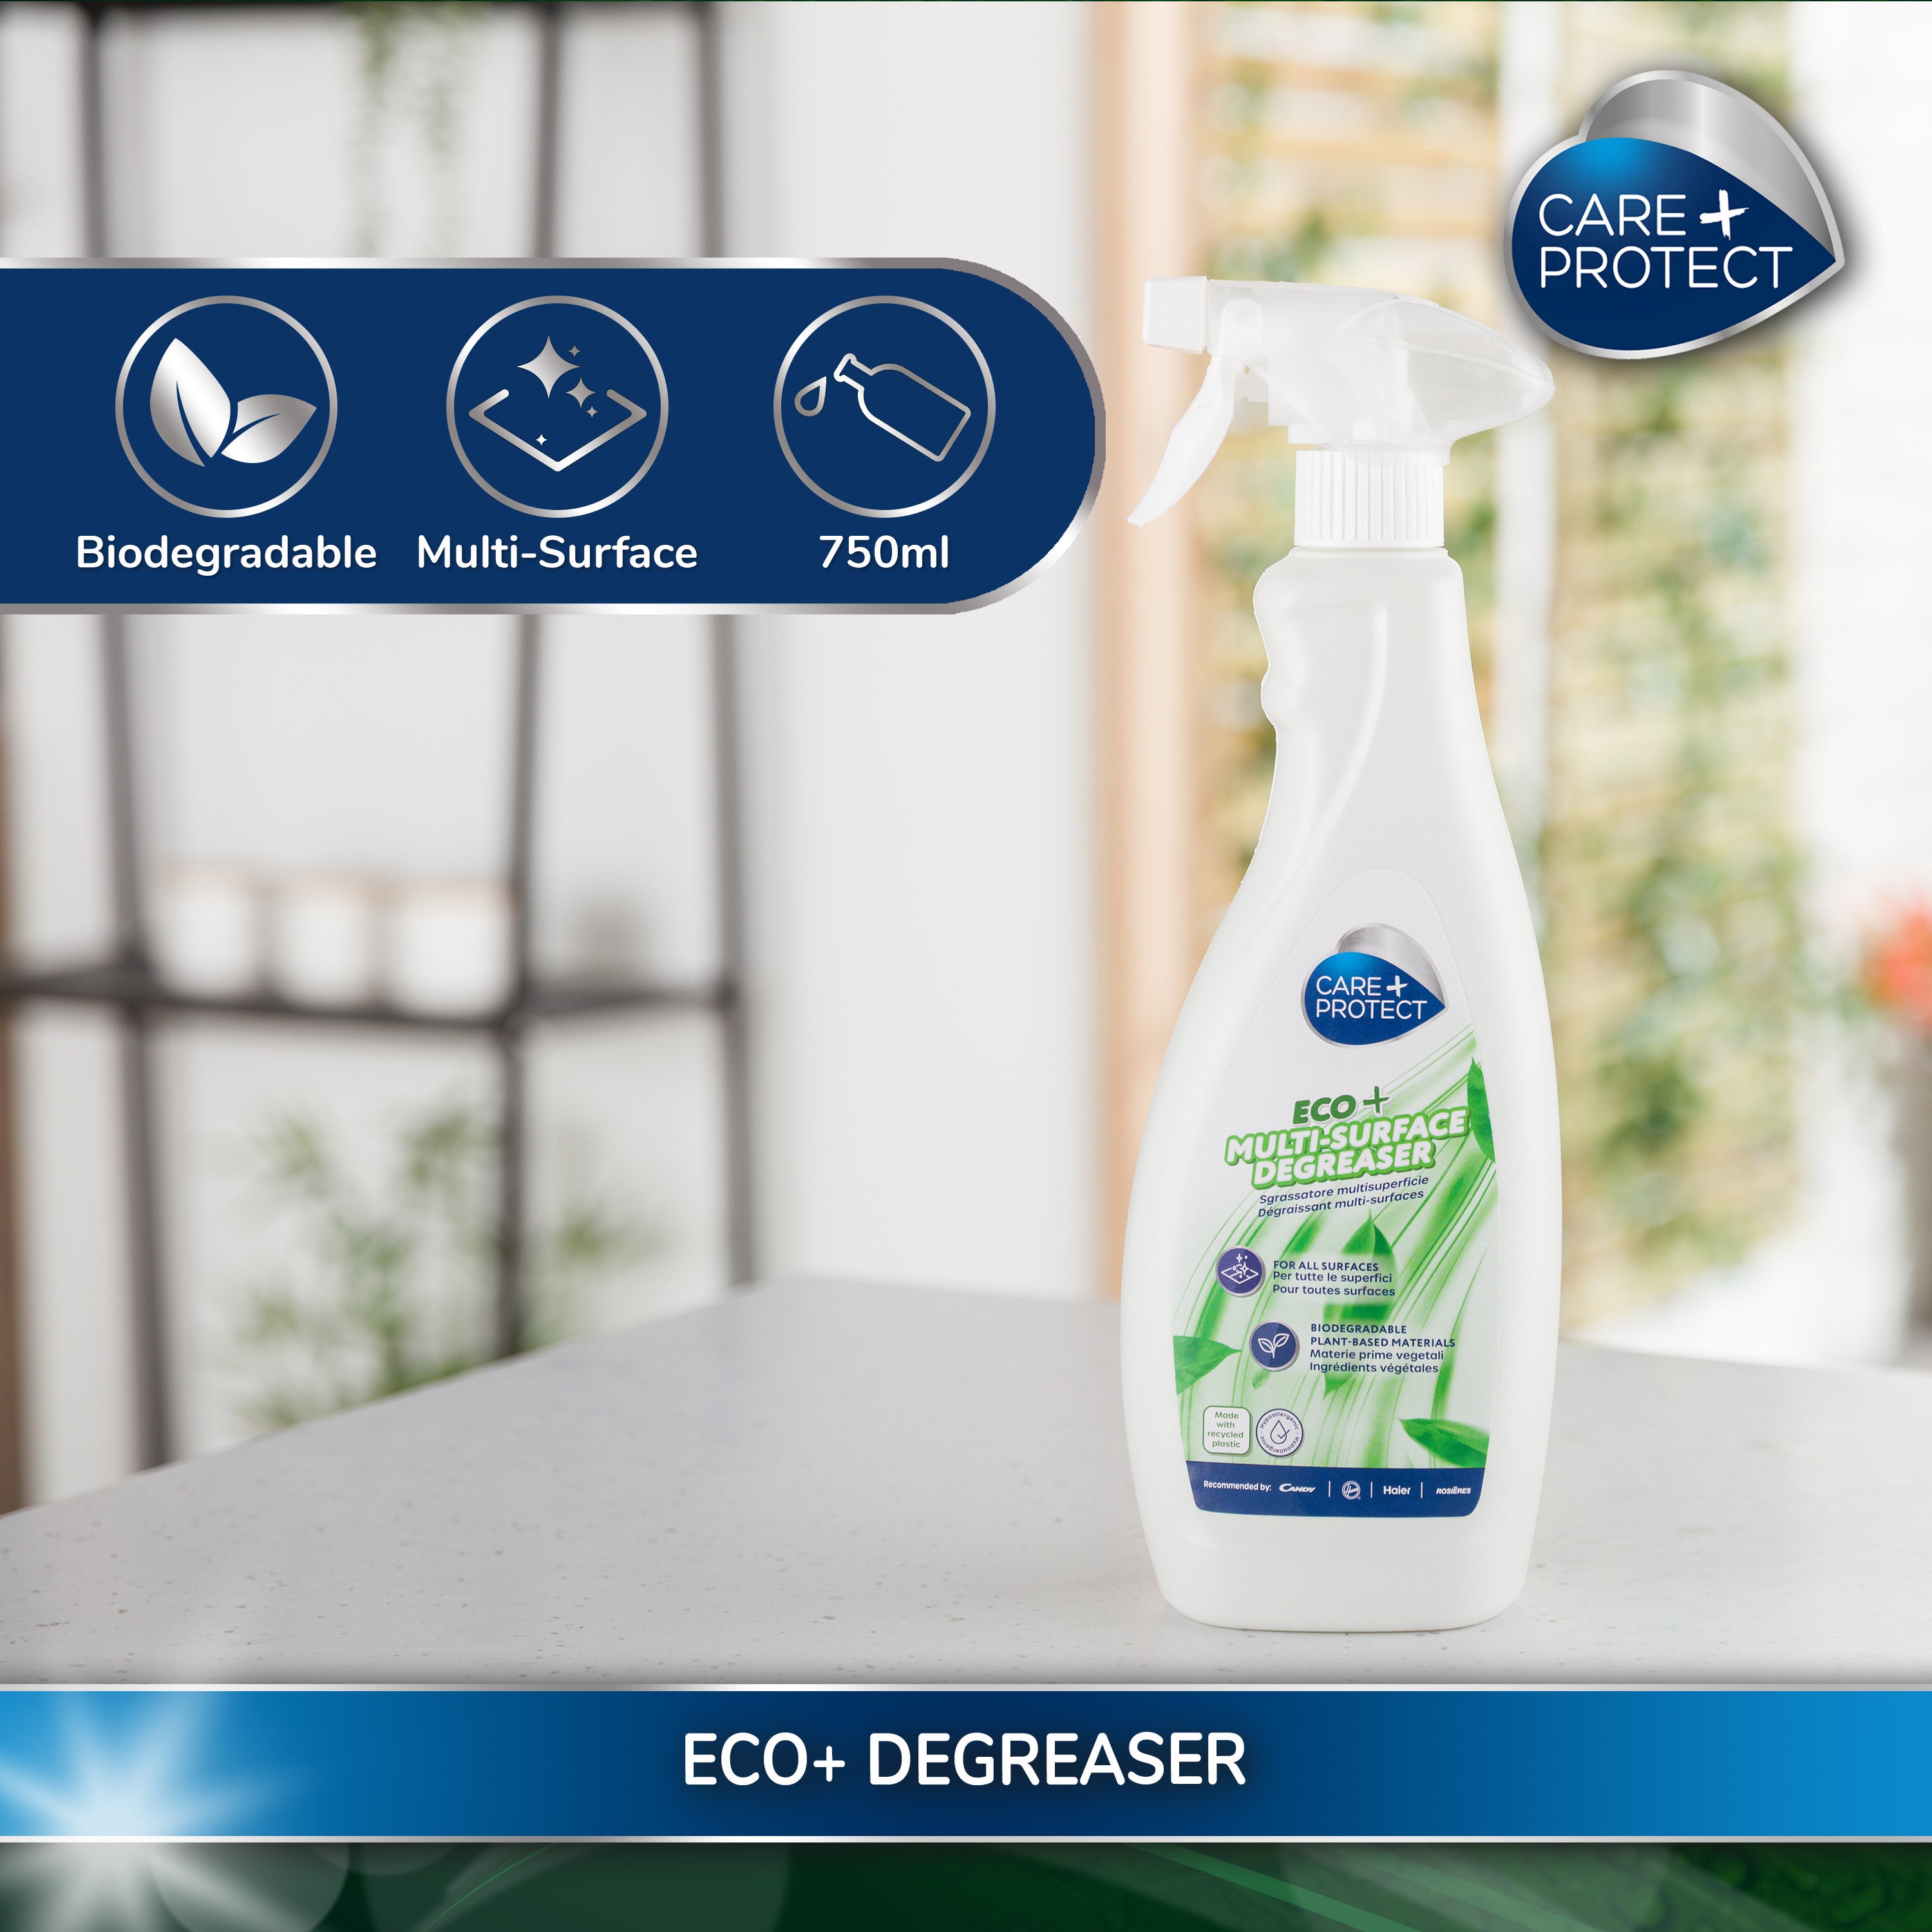 CARE + PROTECT ECO+ Multi-Surface Degreaser, Strongly Degreases and Cleans the Kitchen and Home Surfaces, Deeply Removes Dirt and Grease, 750 ml